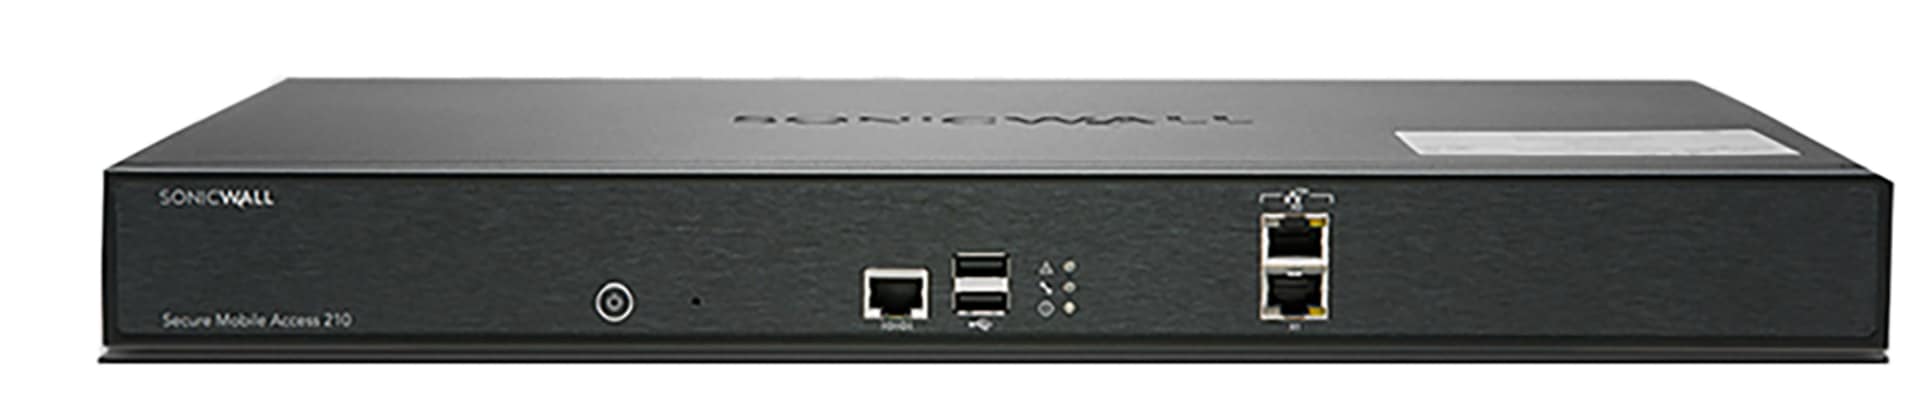 SonicWall Secure Mobile Access 210 - security appliance - with 1 year 24x7 Support